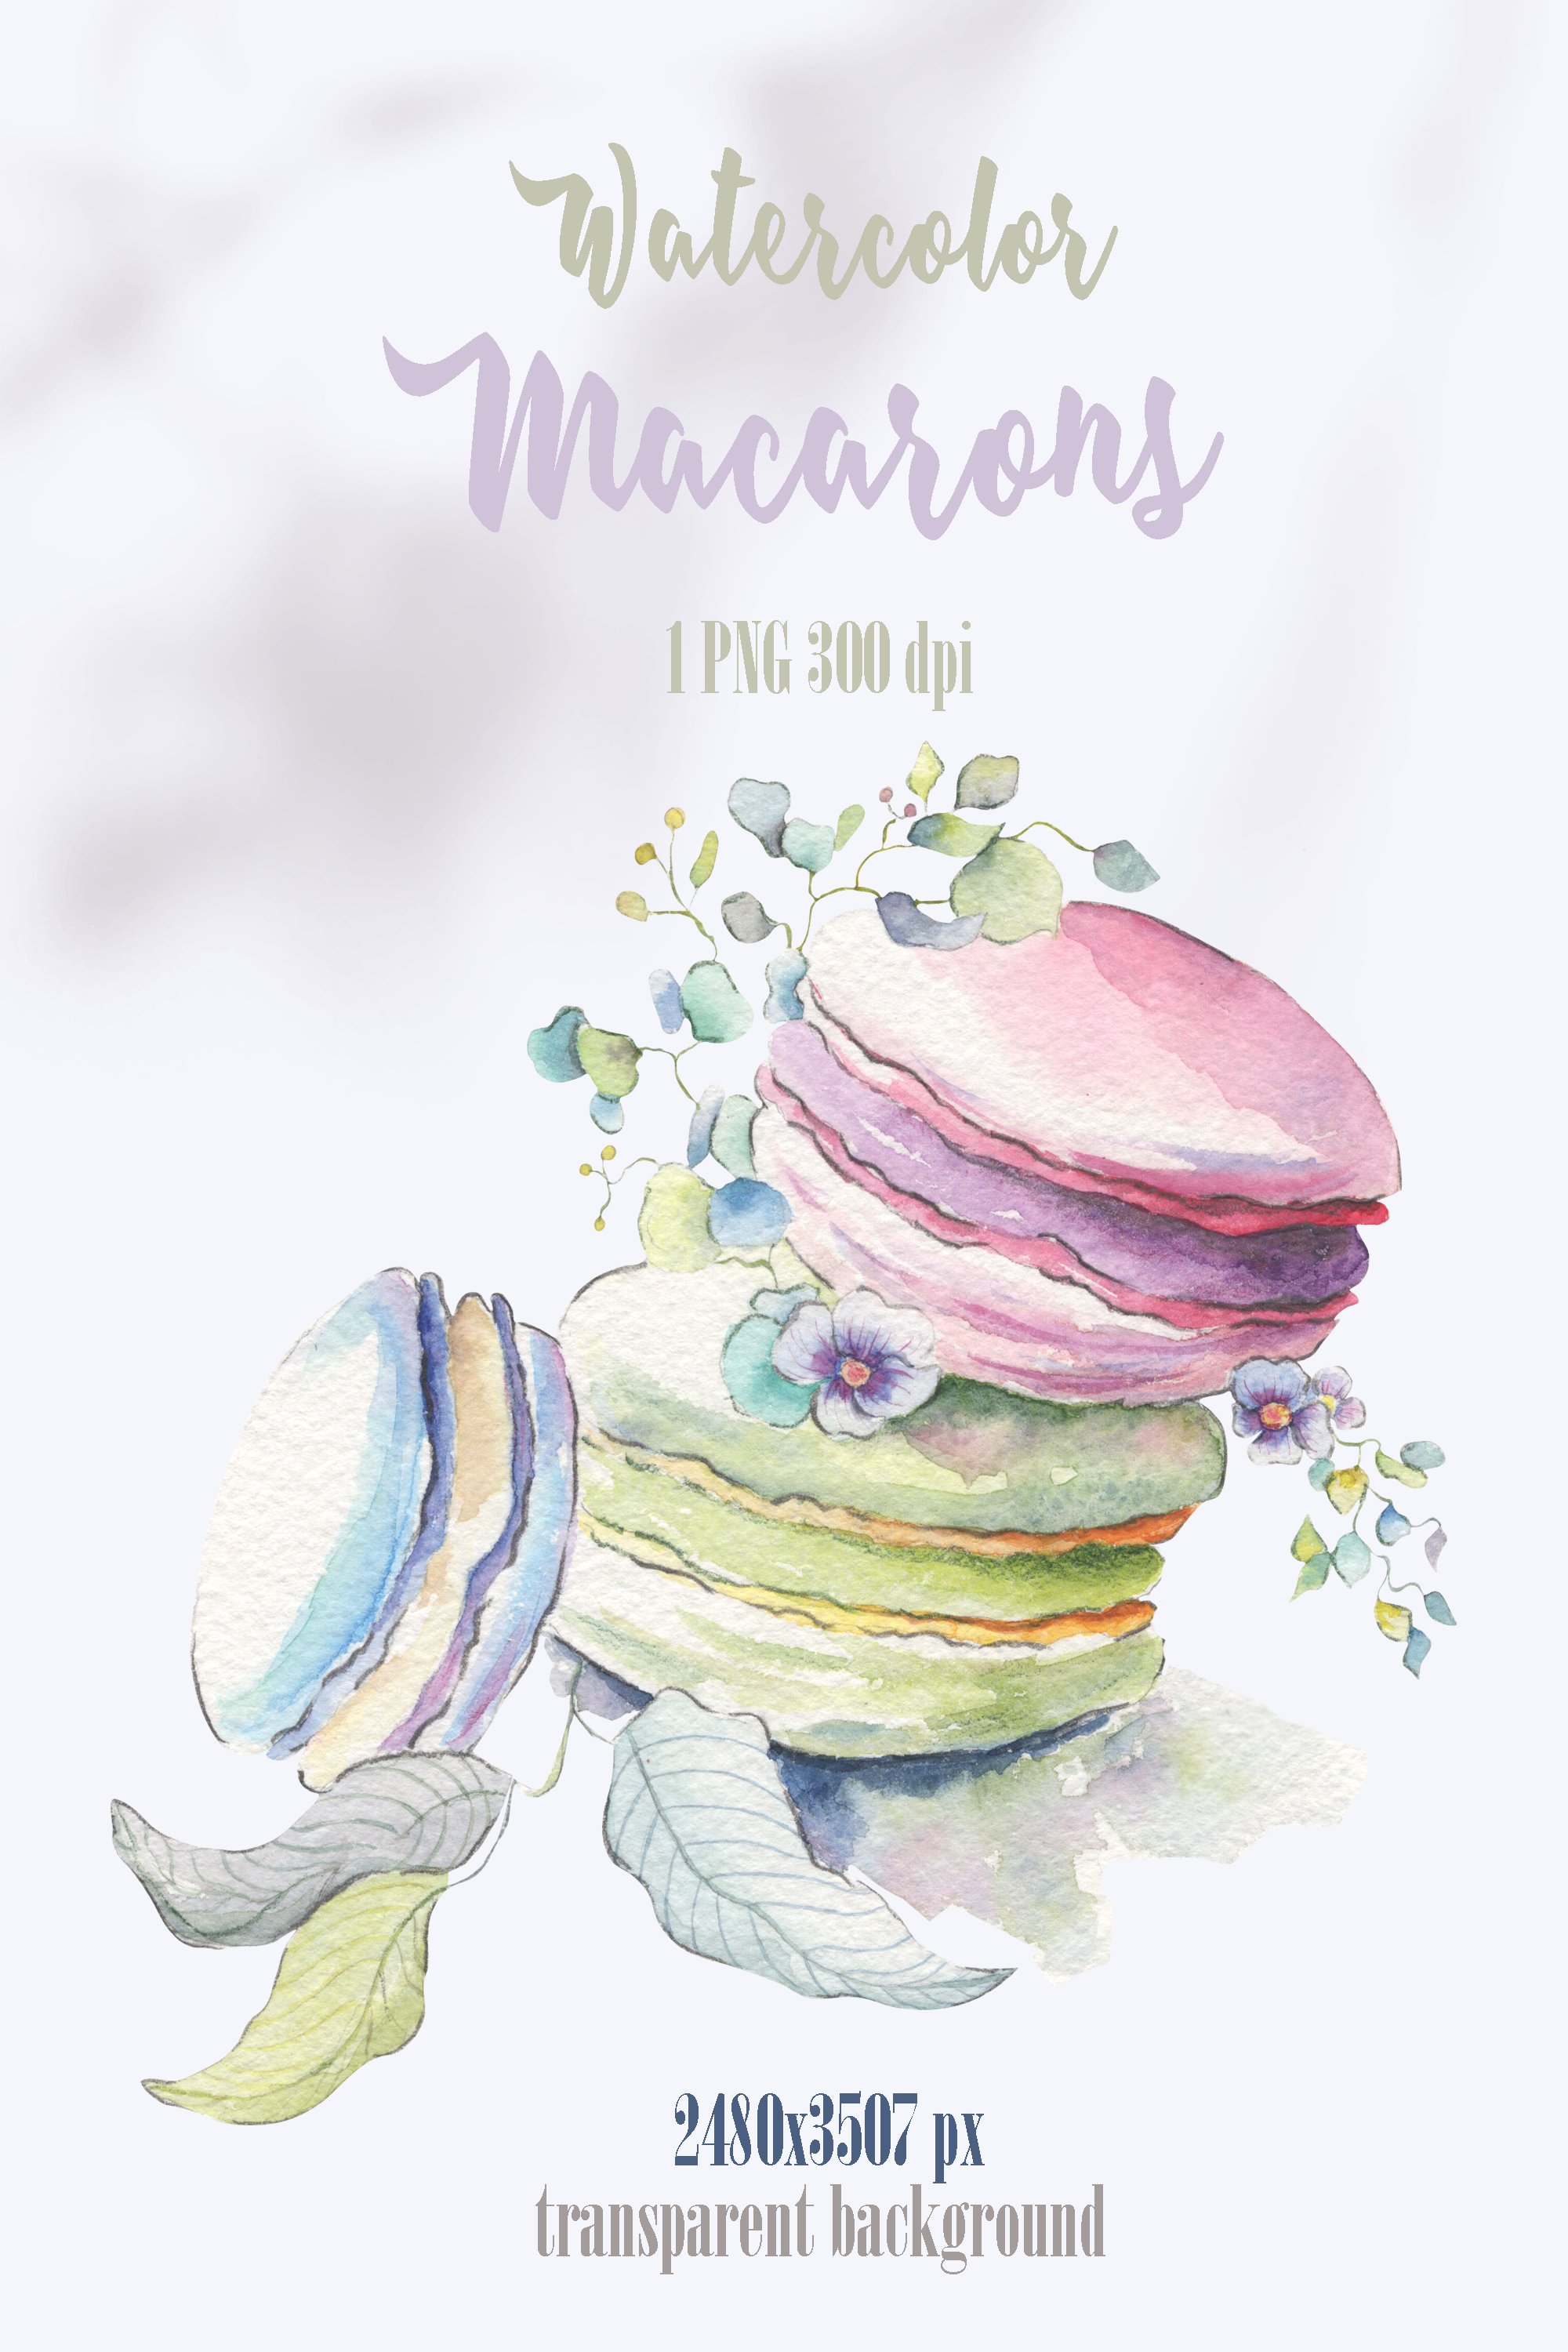 Elegant and delicate macaroons look like a part of art.